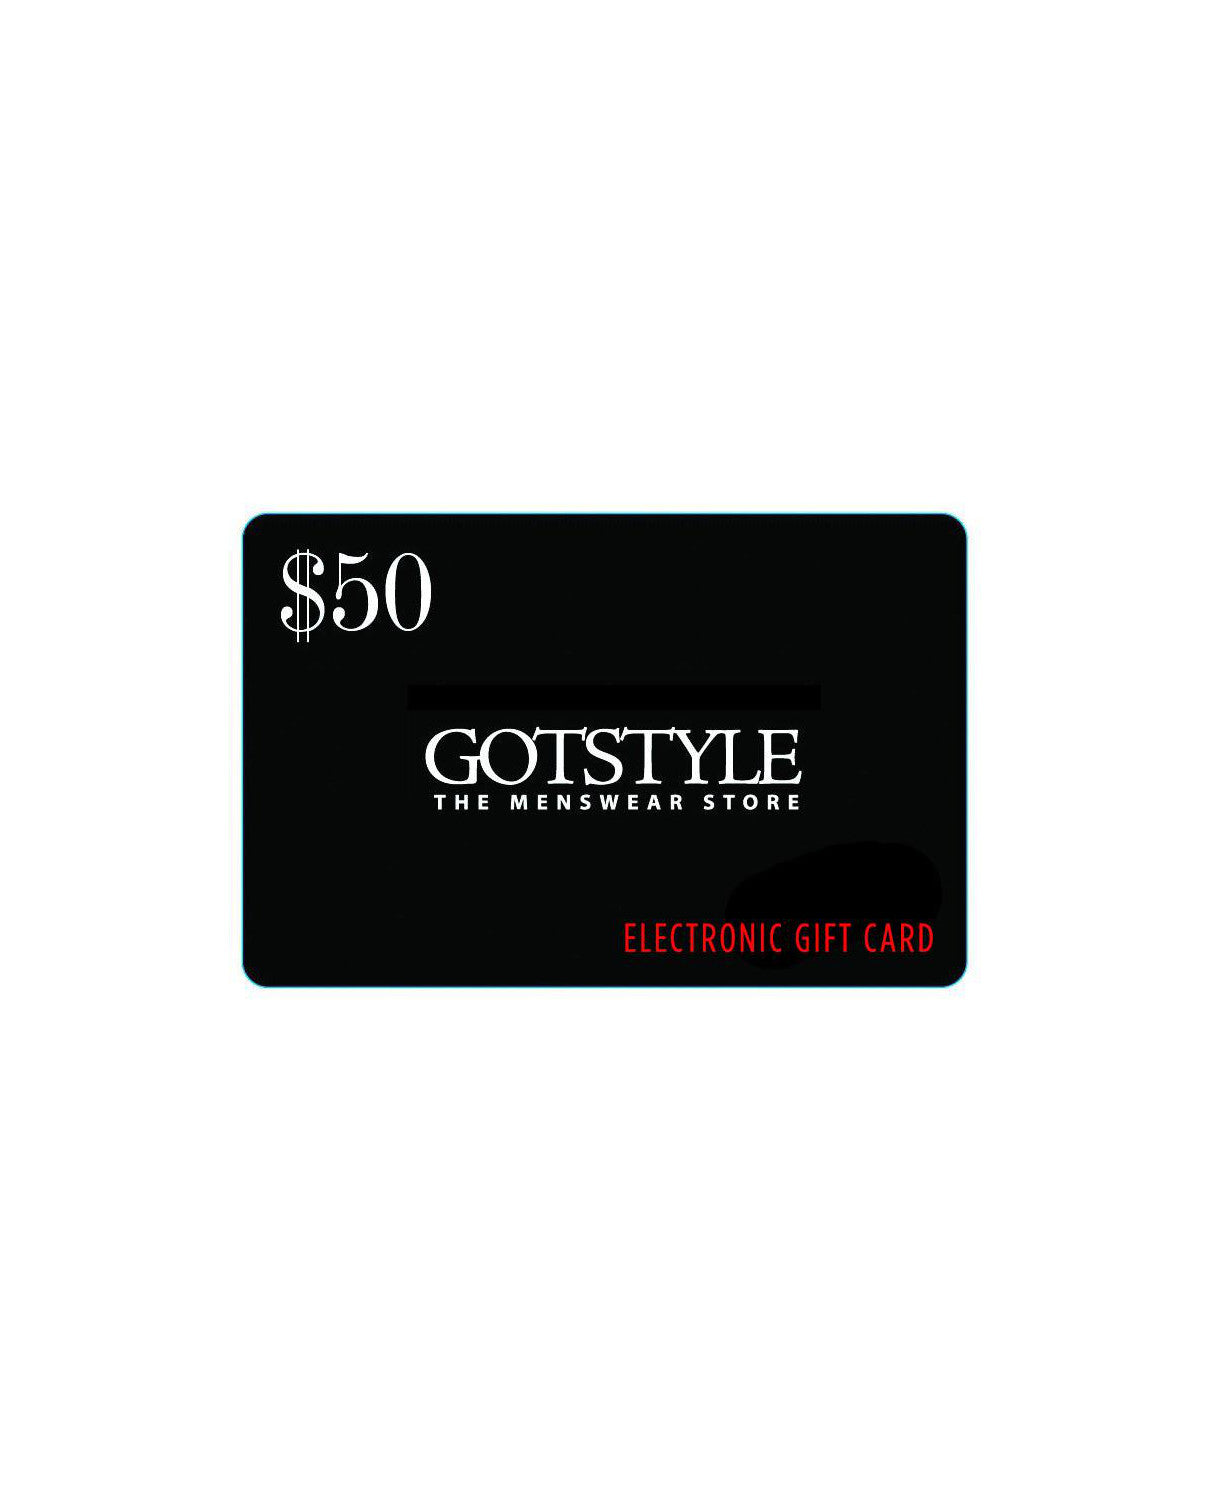 Gift Card - Online